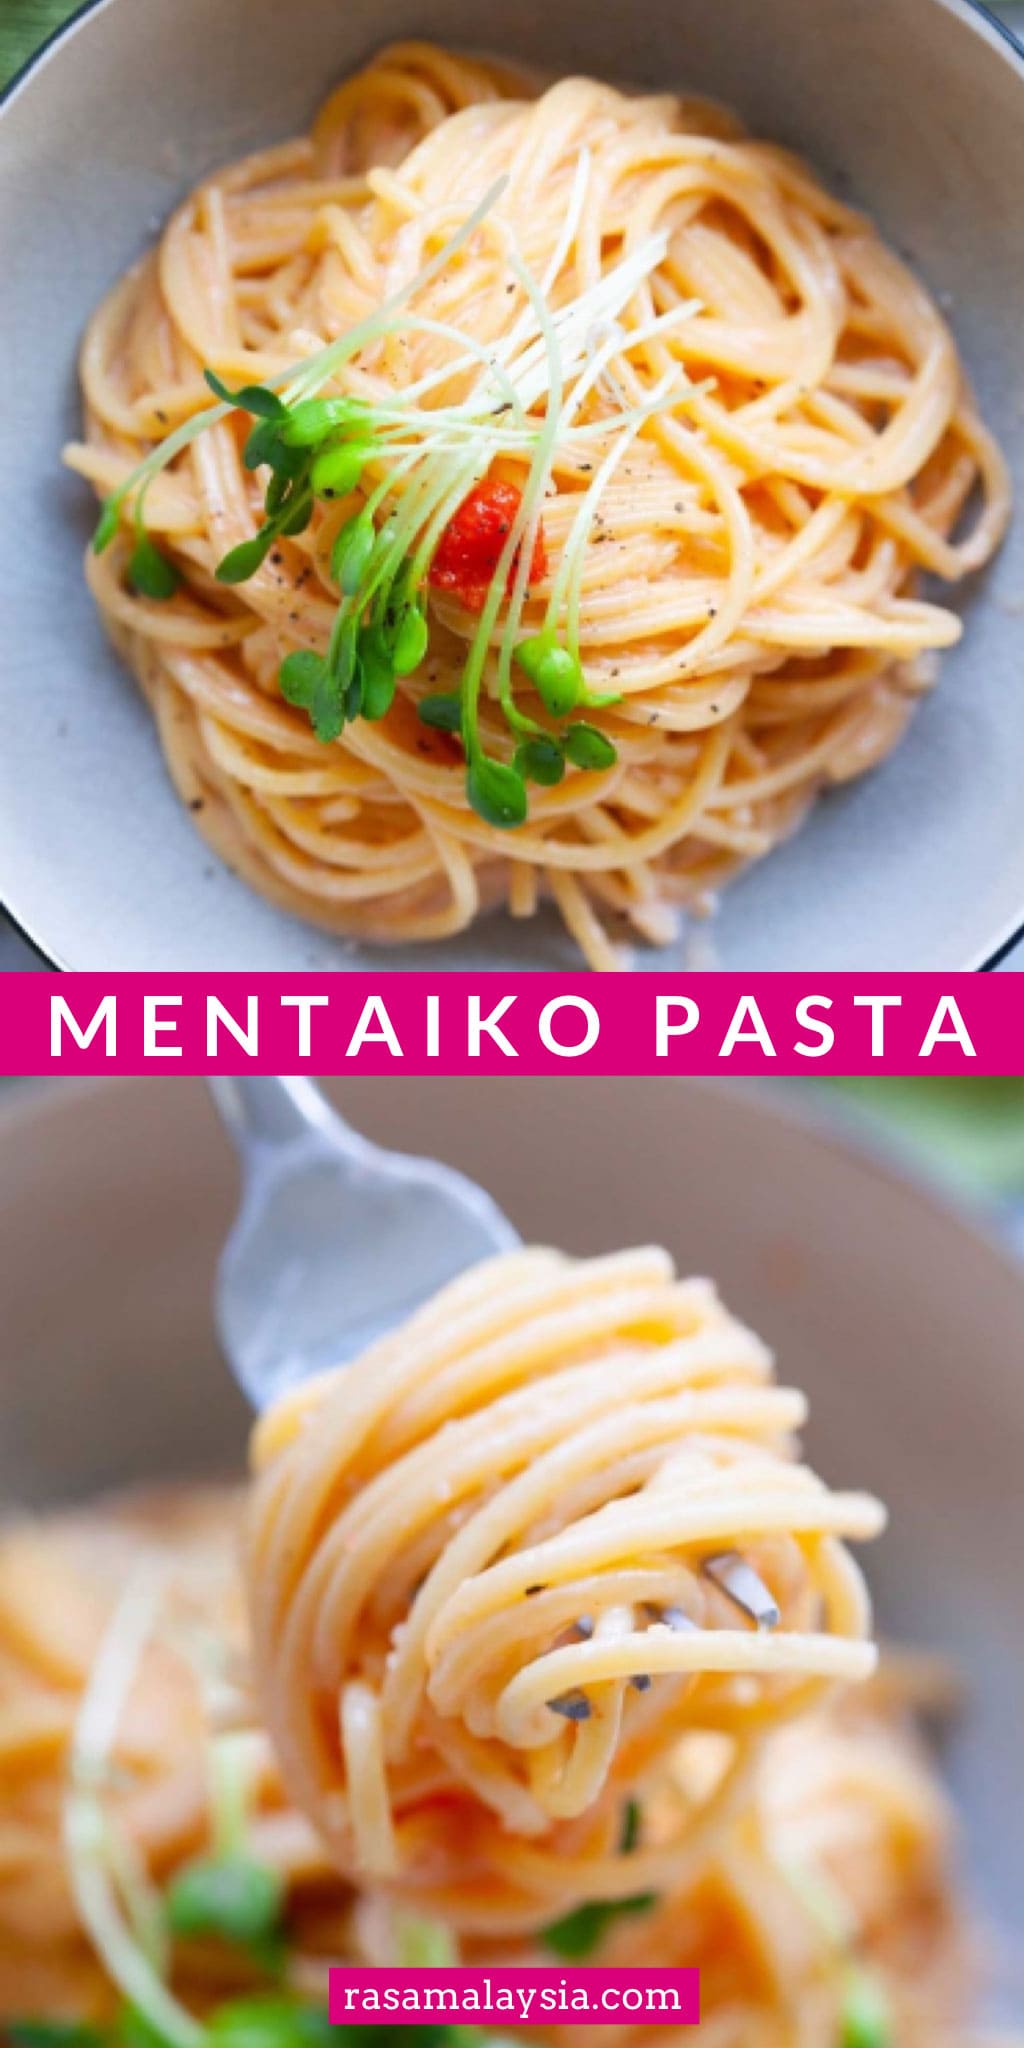 Mentaiko pasta is a Japanese pasta recipe with spaghetti, spicy Mentaiko or pollock/cod roe, in a rich and creamy Mentaiko sauce. | rasamalaysia.com